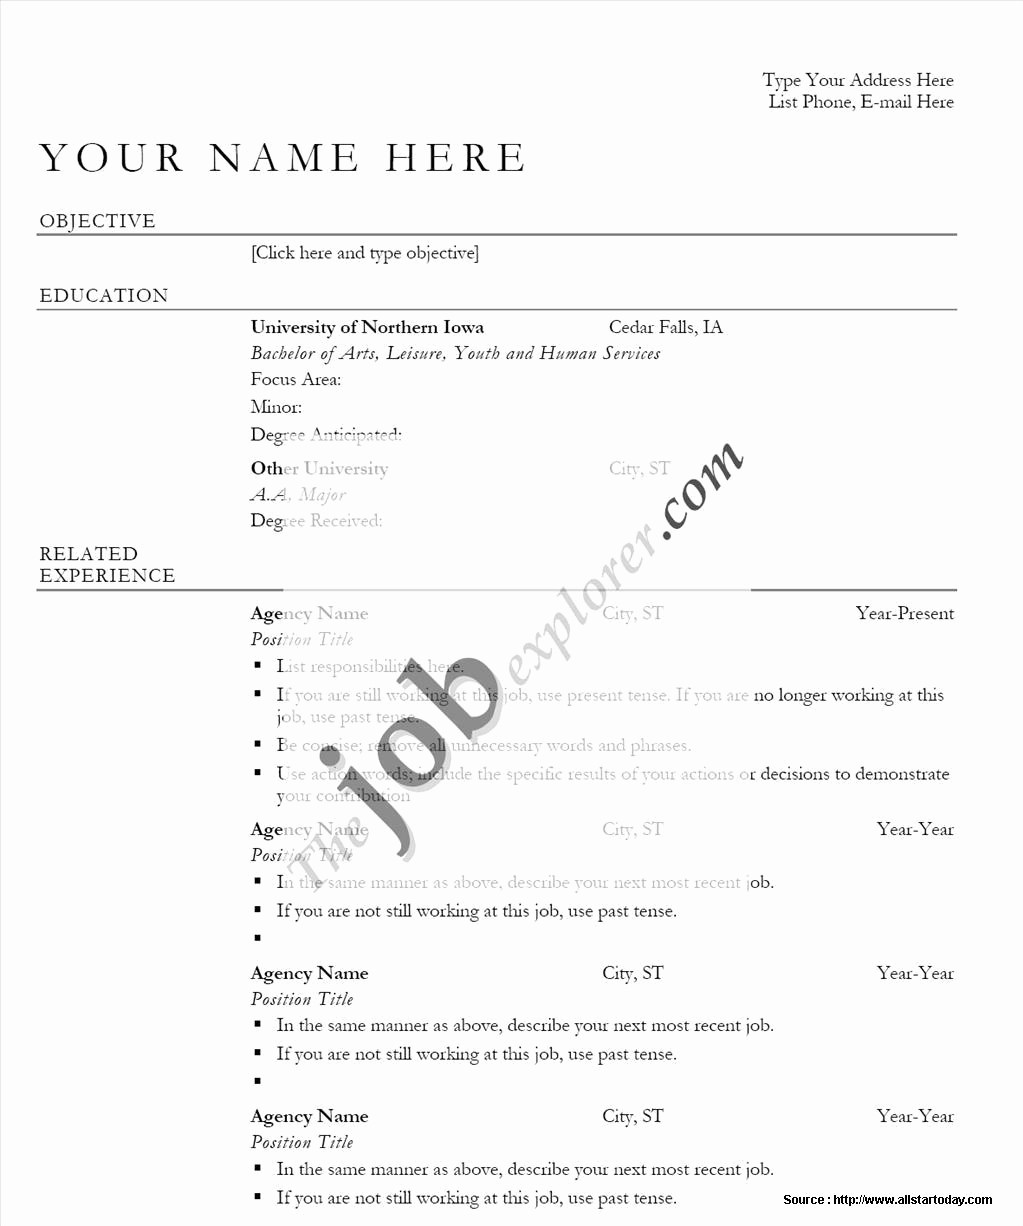 Functional Resume Templates Free Download New Fill In the Blank Functional Resume Template Resume